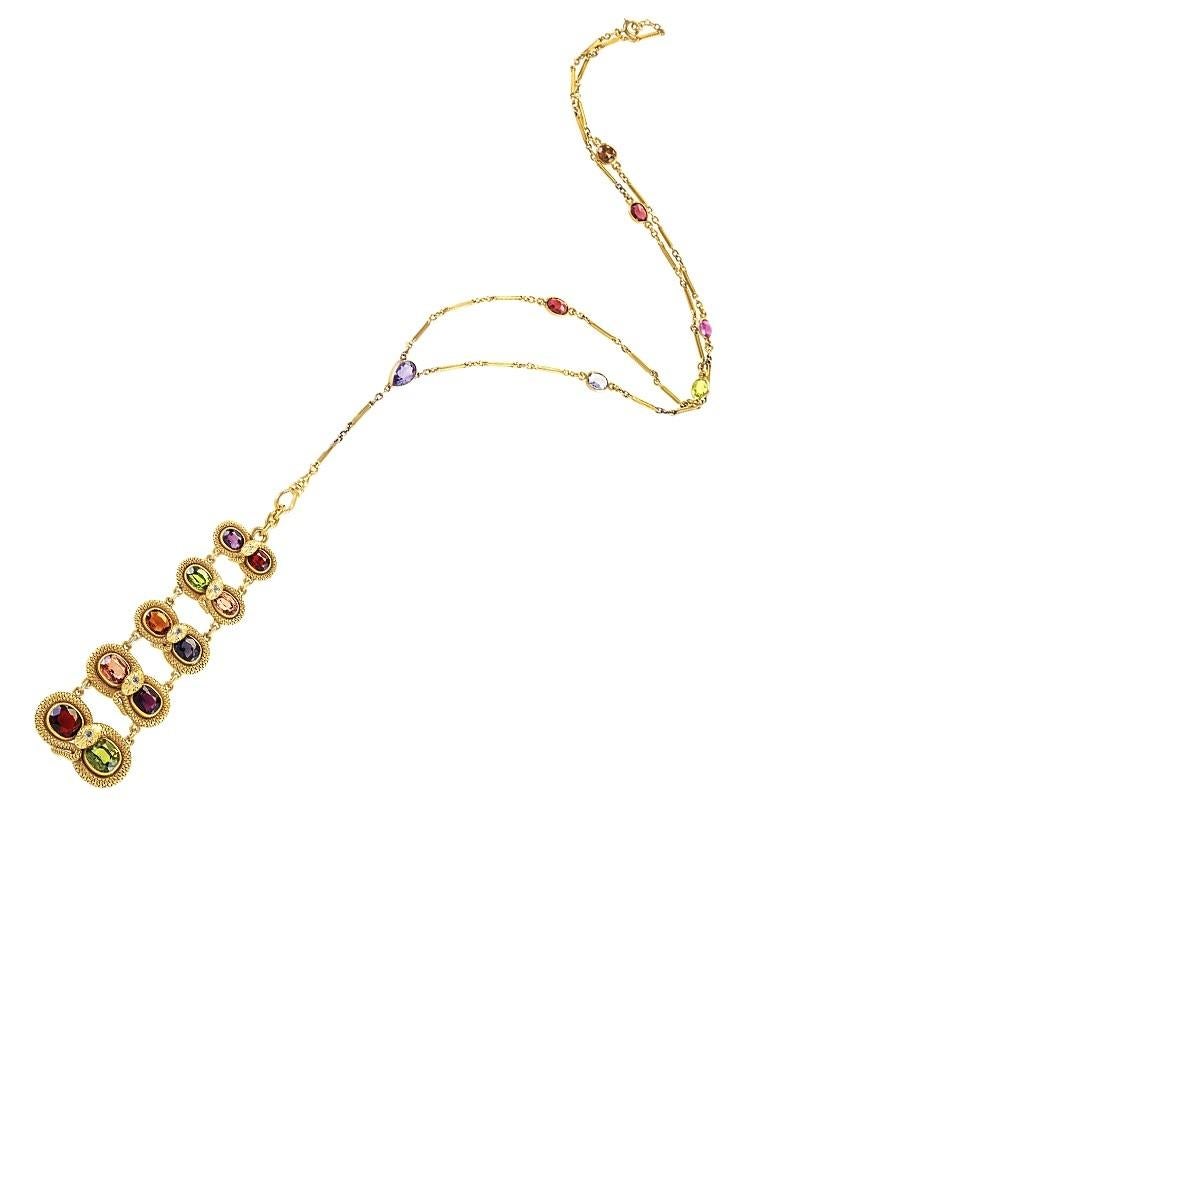 Women's Antique Gold and Multi Stone Snake Necklace